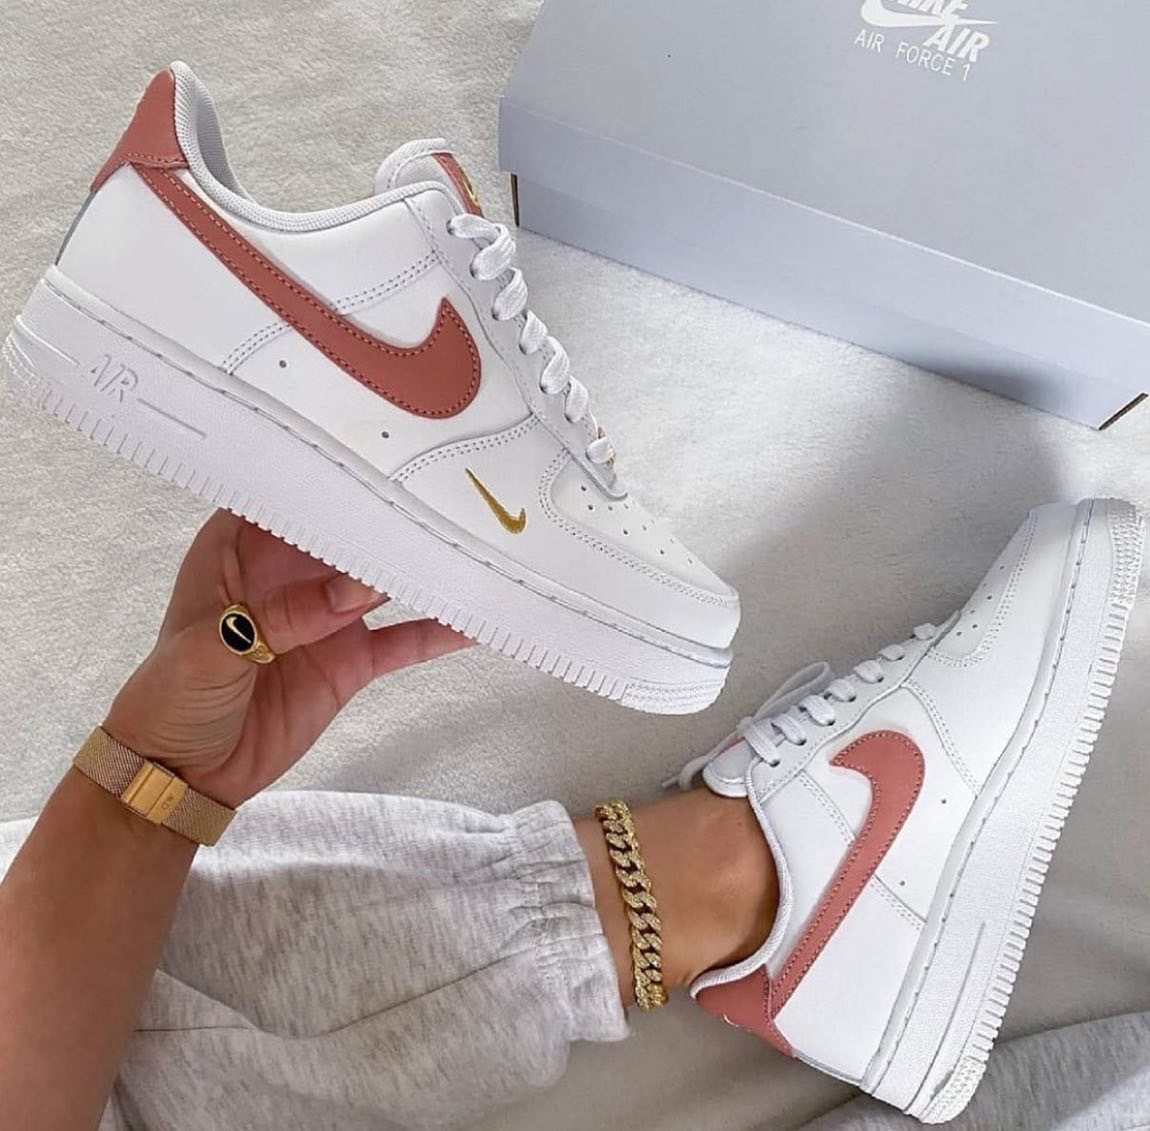 Commerce Dignified Conditional air force 1 white rust pink Abandoned ...